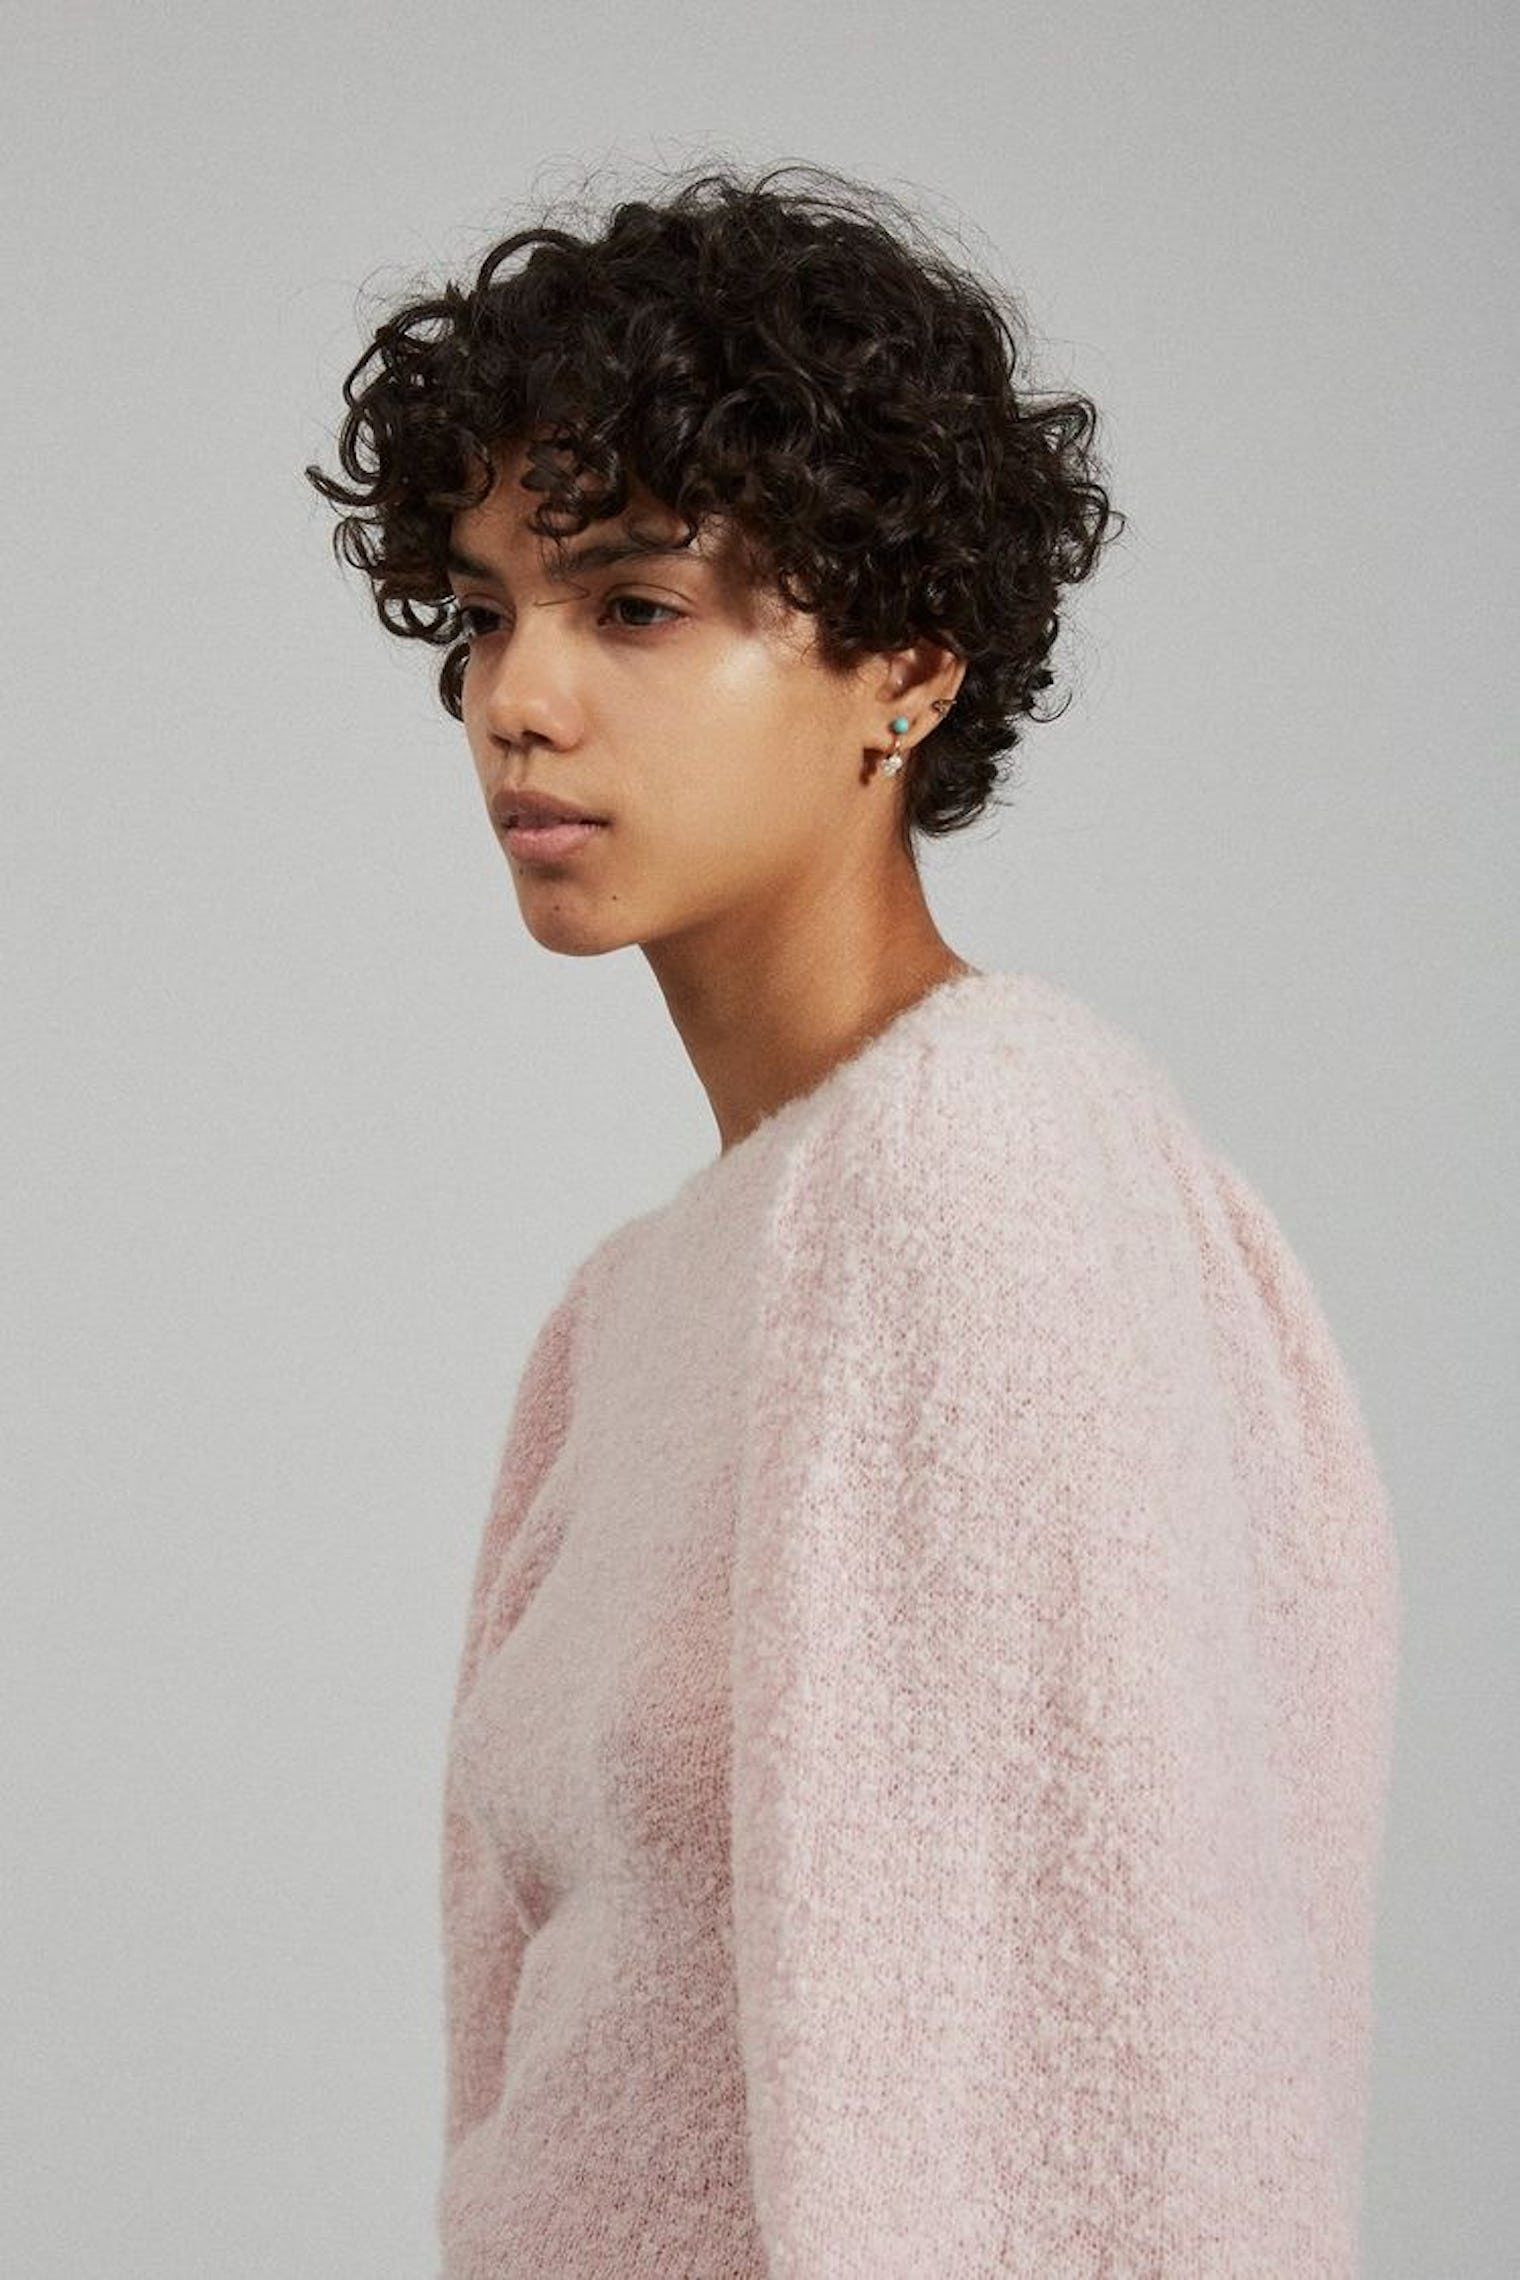 Stunning Short Curly Hairstyles to Rock Your Natural Curls